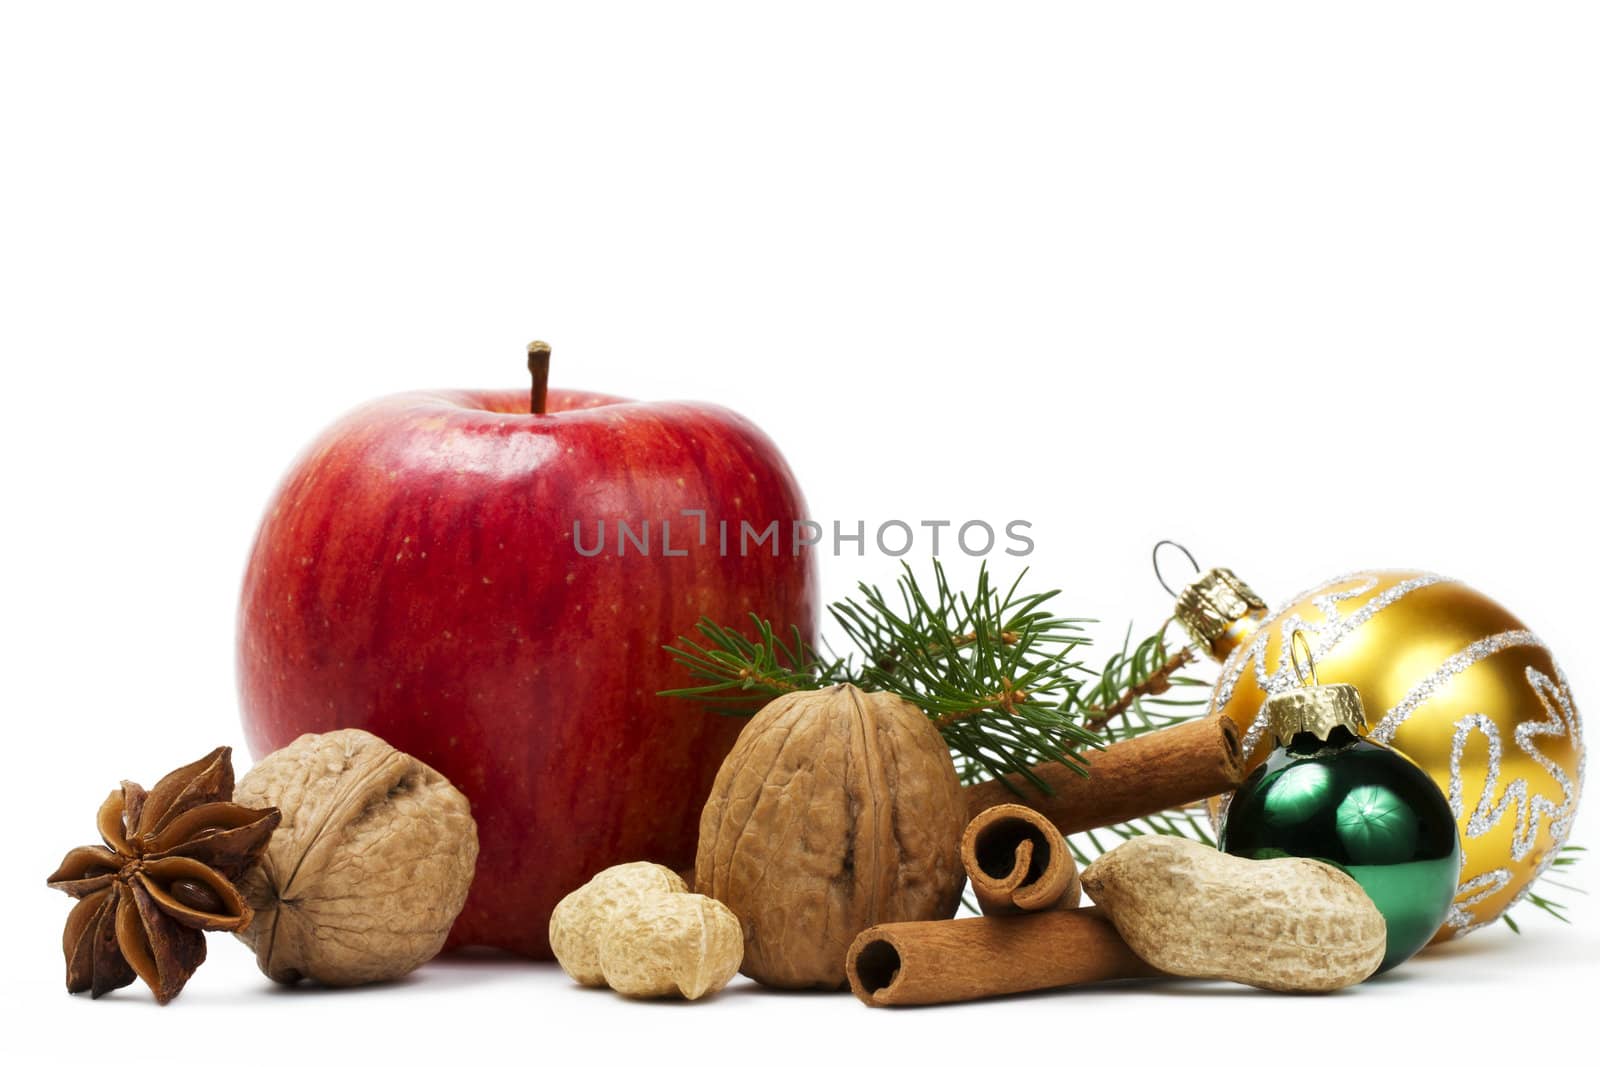 red apple, star anise, some nuts, golden and green christmas balls and a branch on white background